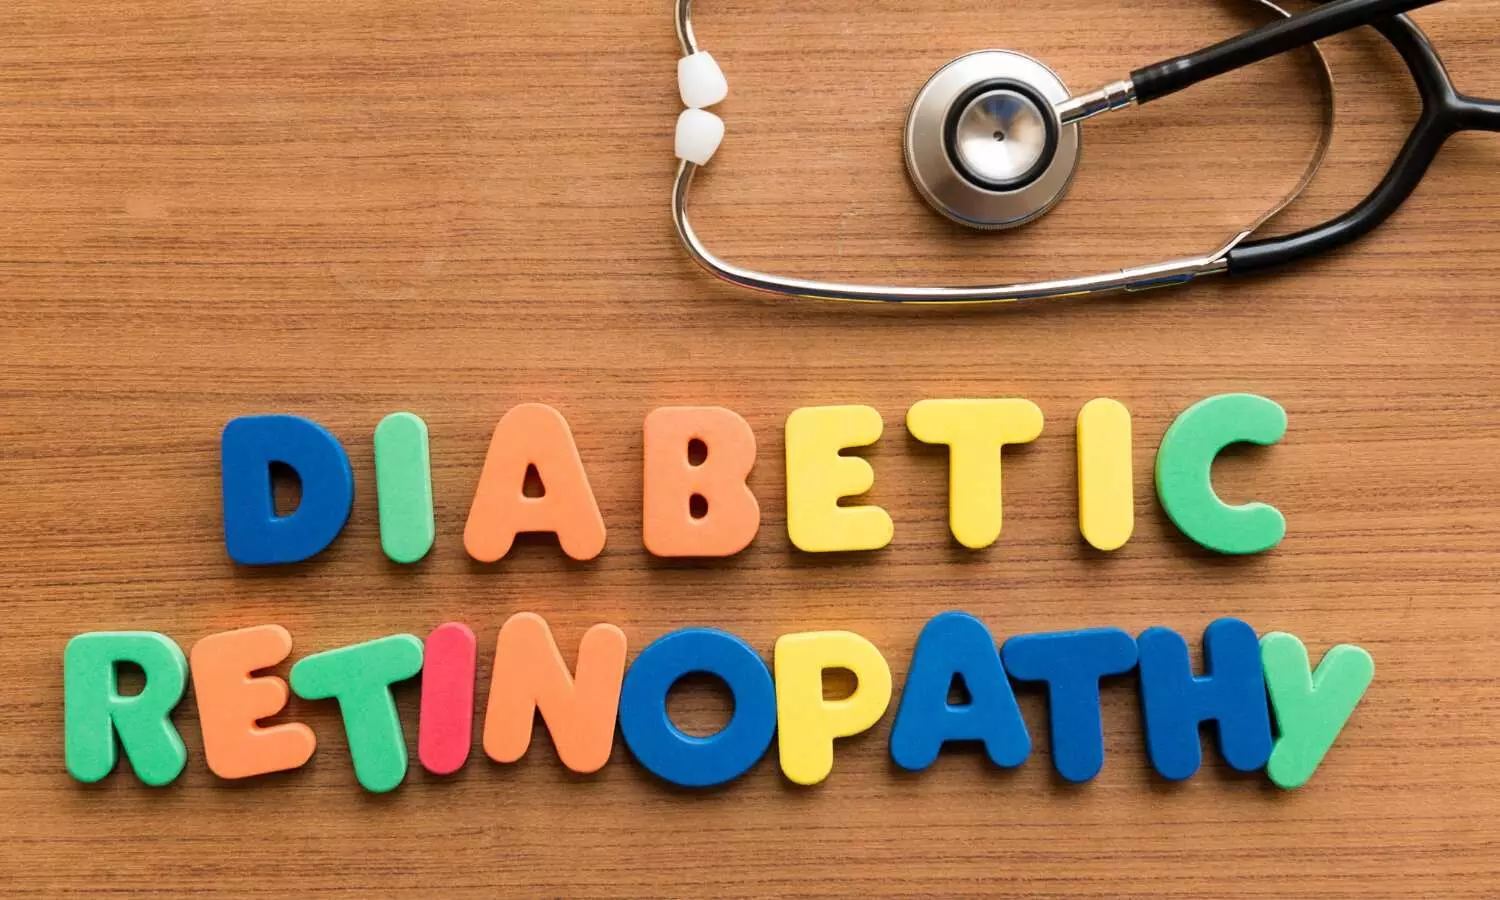 TD2 patients with diabetic nephropathy have high risk of retinopathy